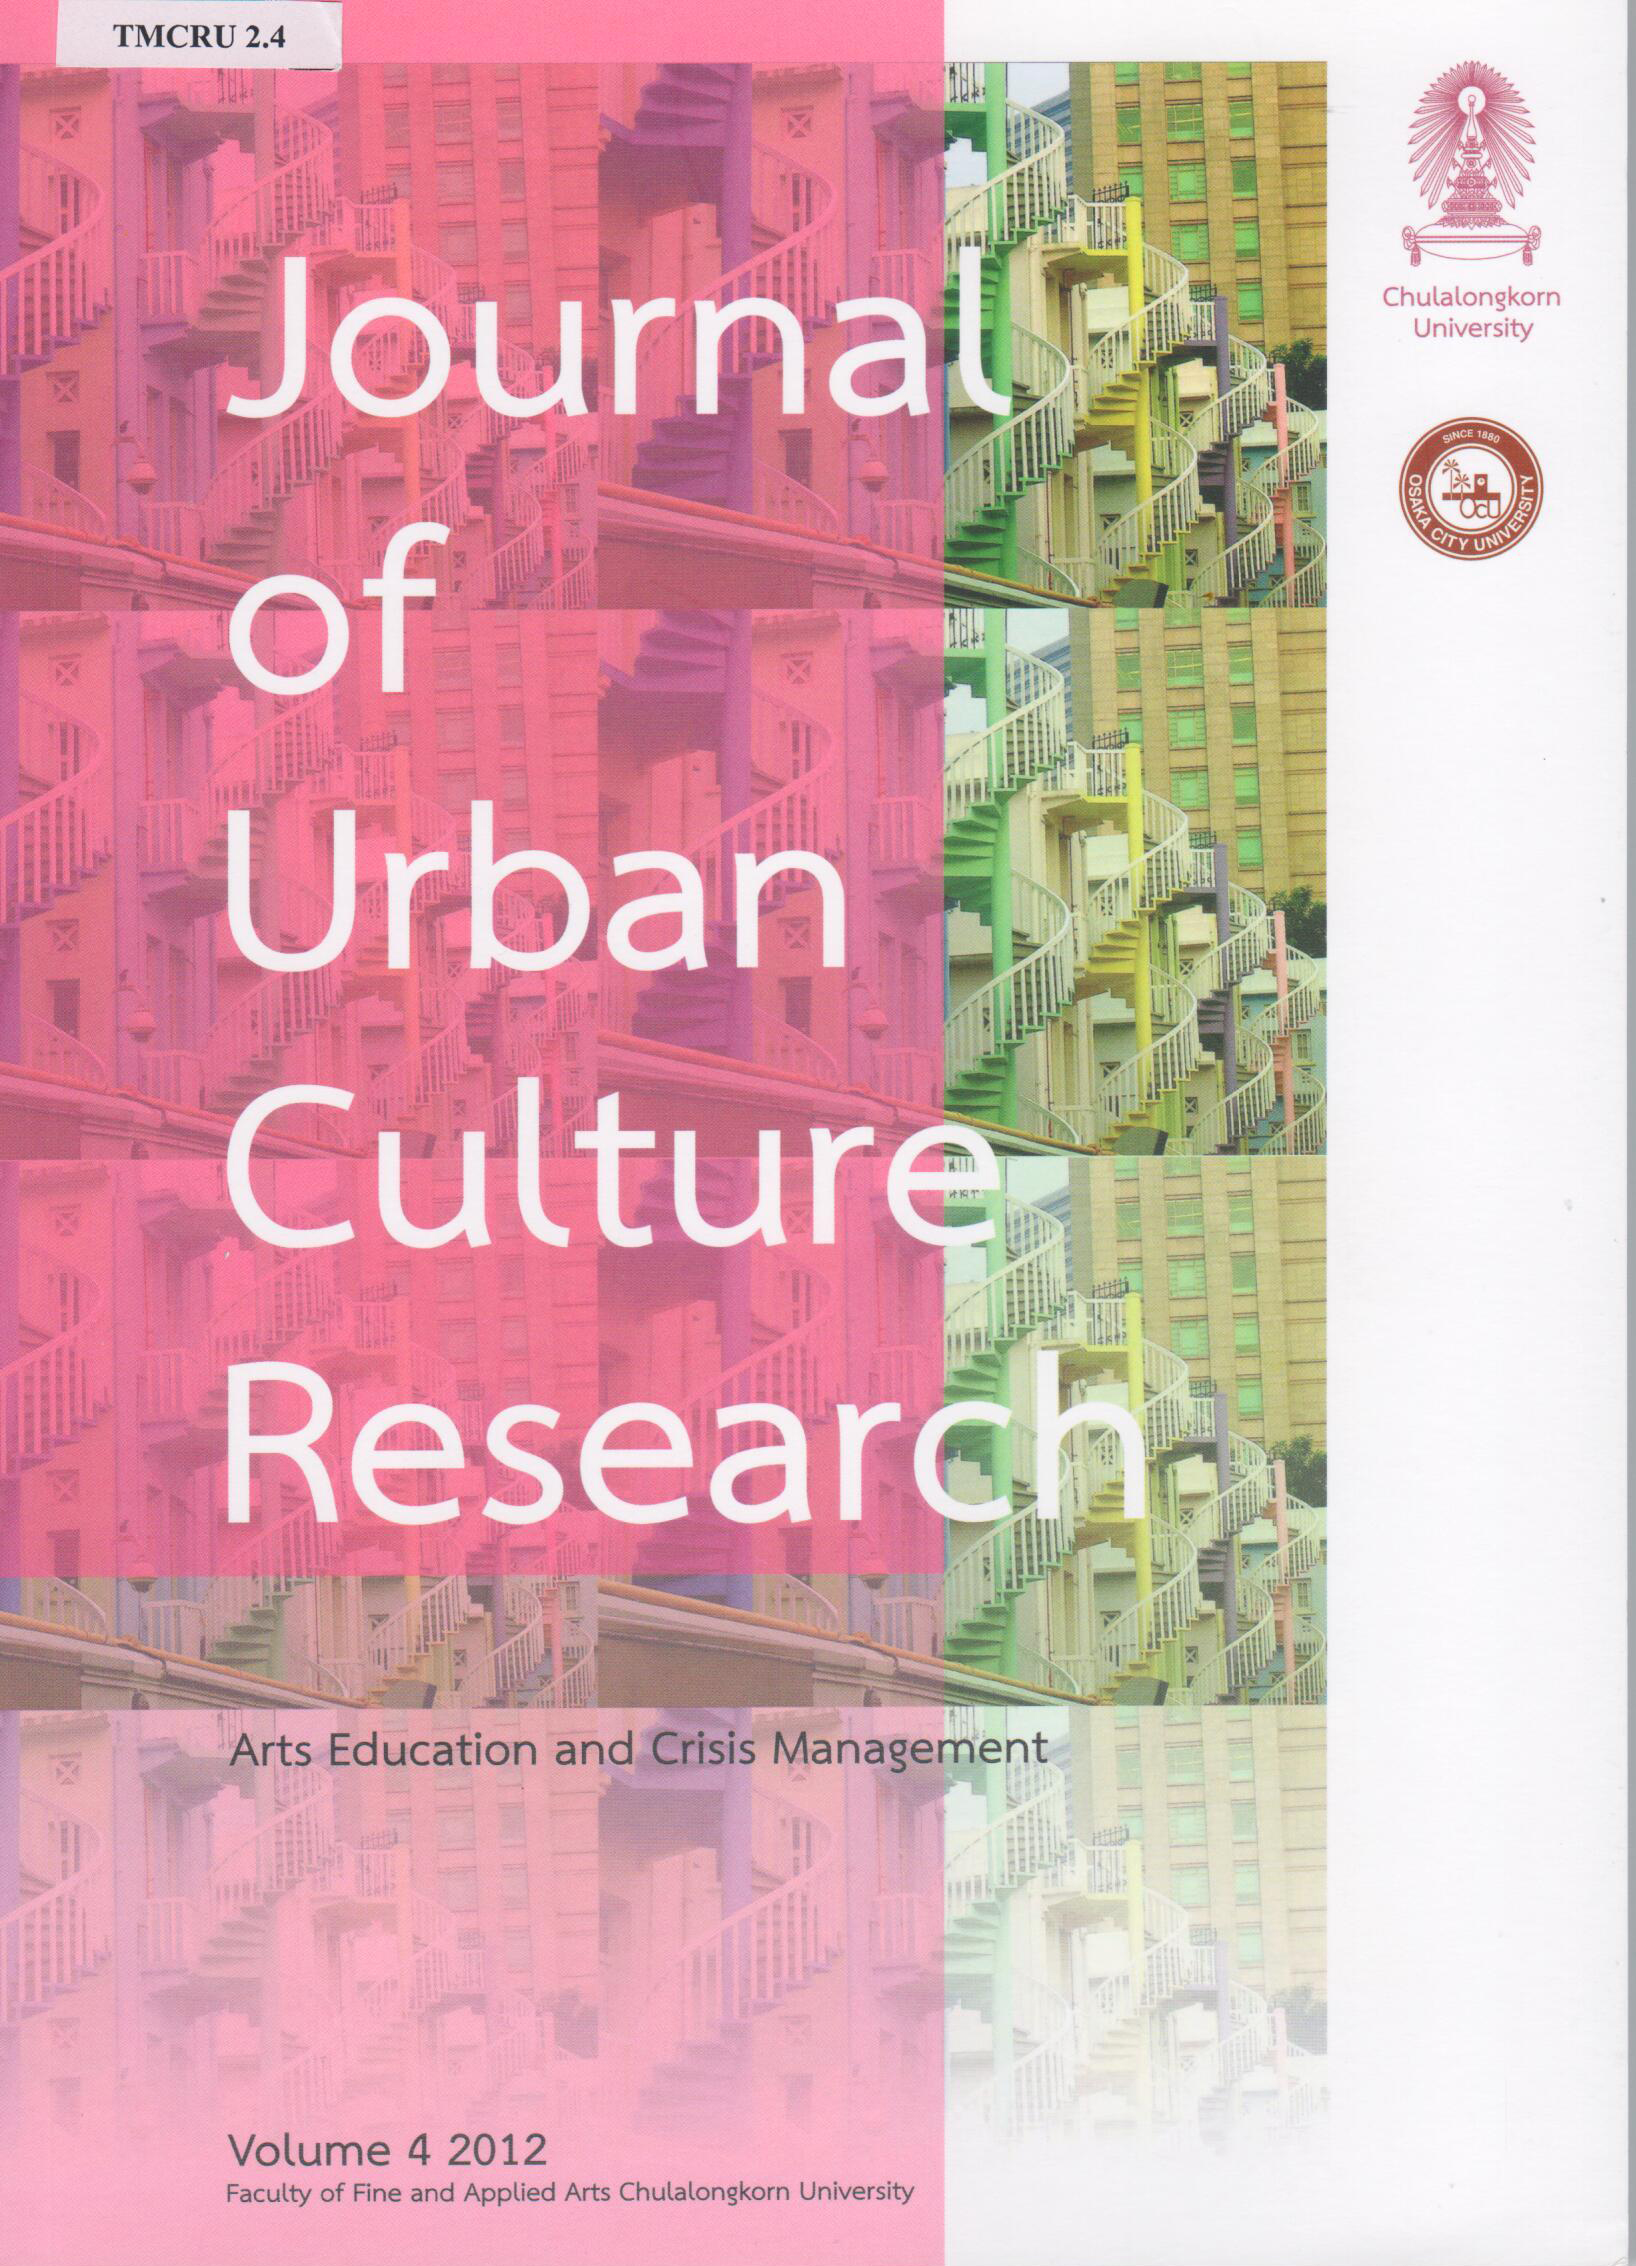 Journal of Urban Culture Research - Cover image of Bugis Street, Singapore provided by Alan Kinear